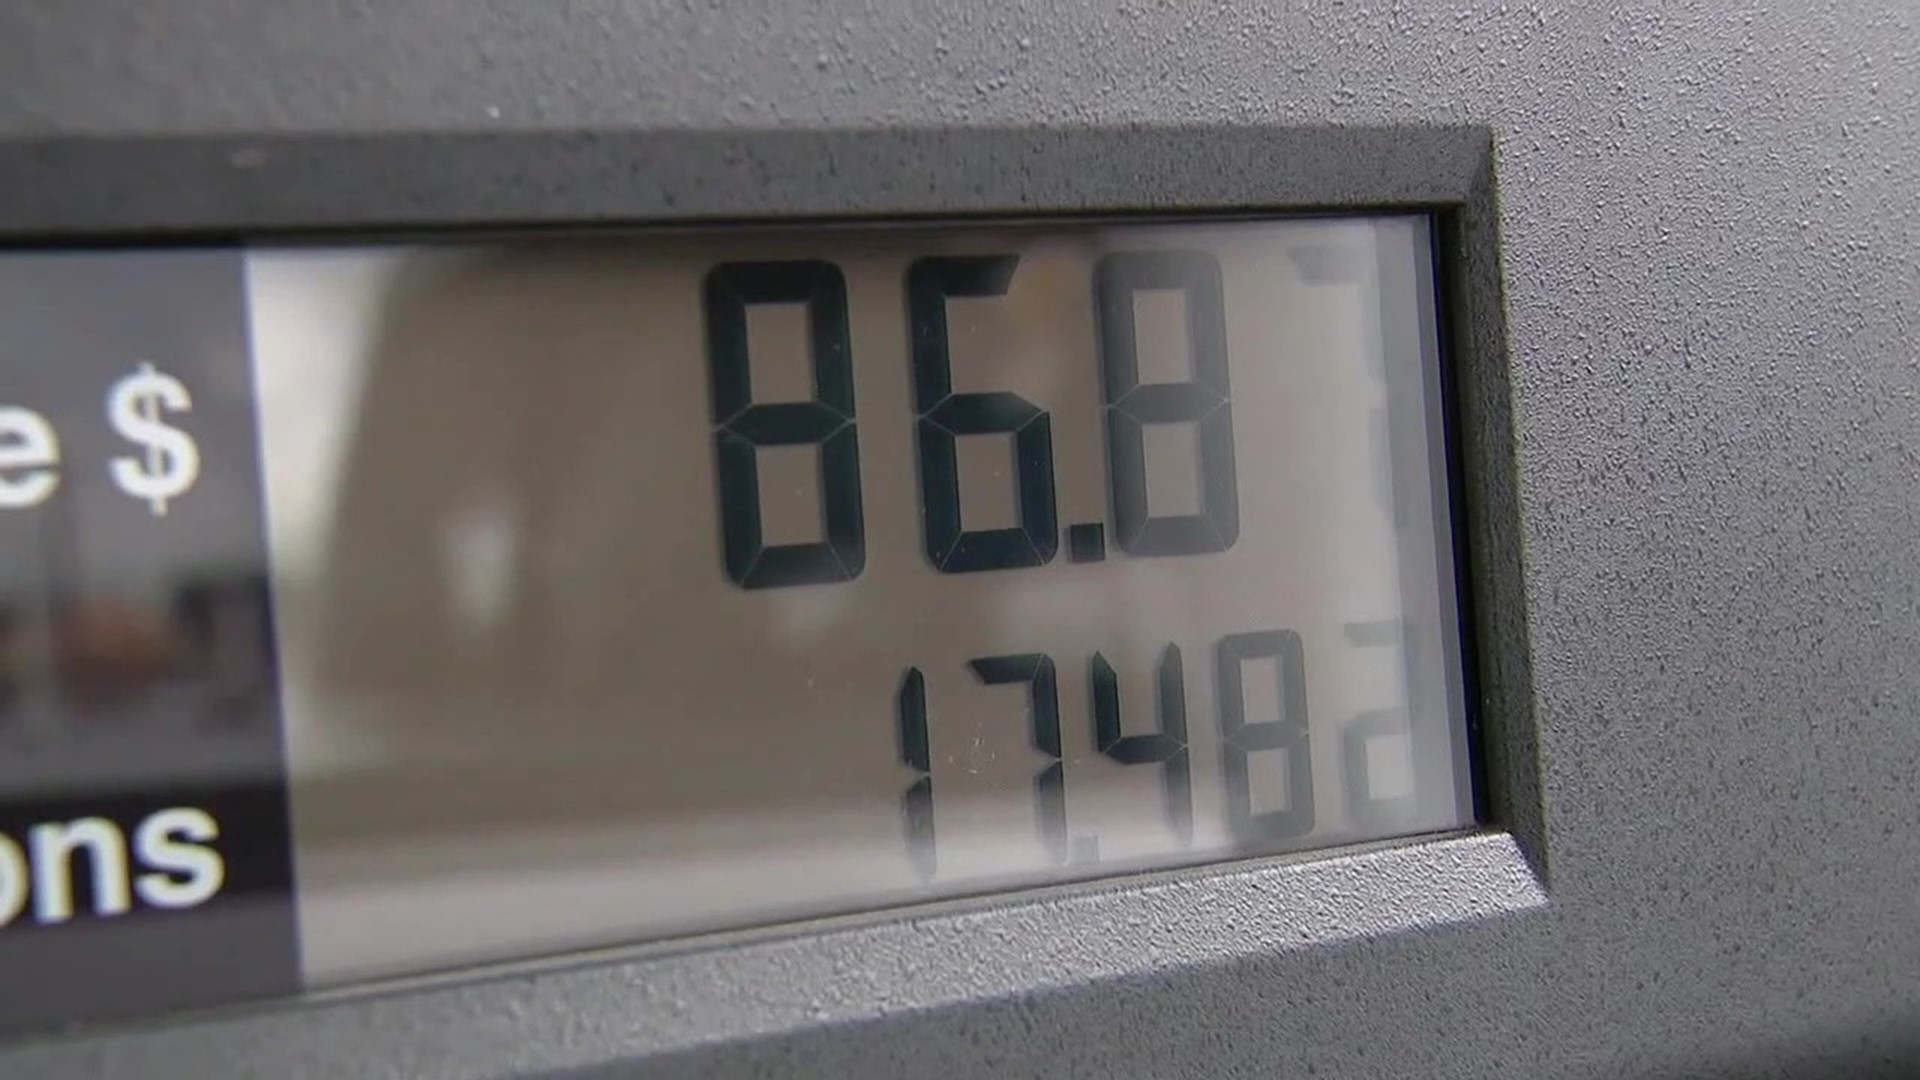 According to GasBuddy, the average price of gas is expected to drop to $3.38/gallon nationwide in 2024.